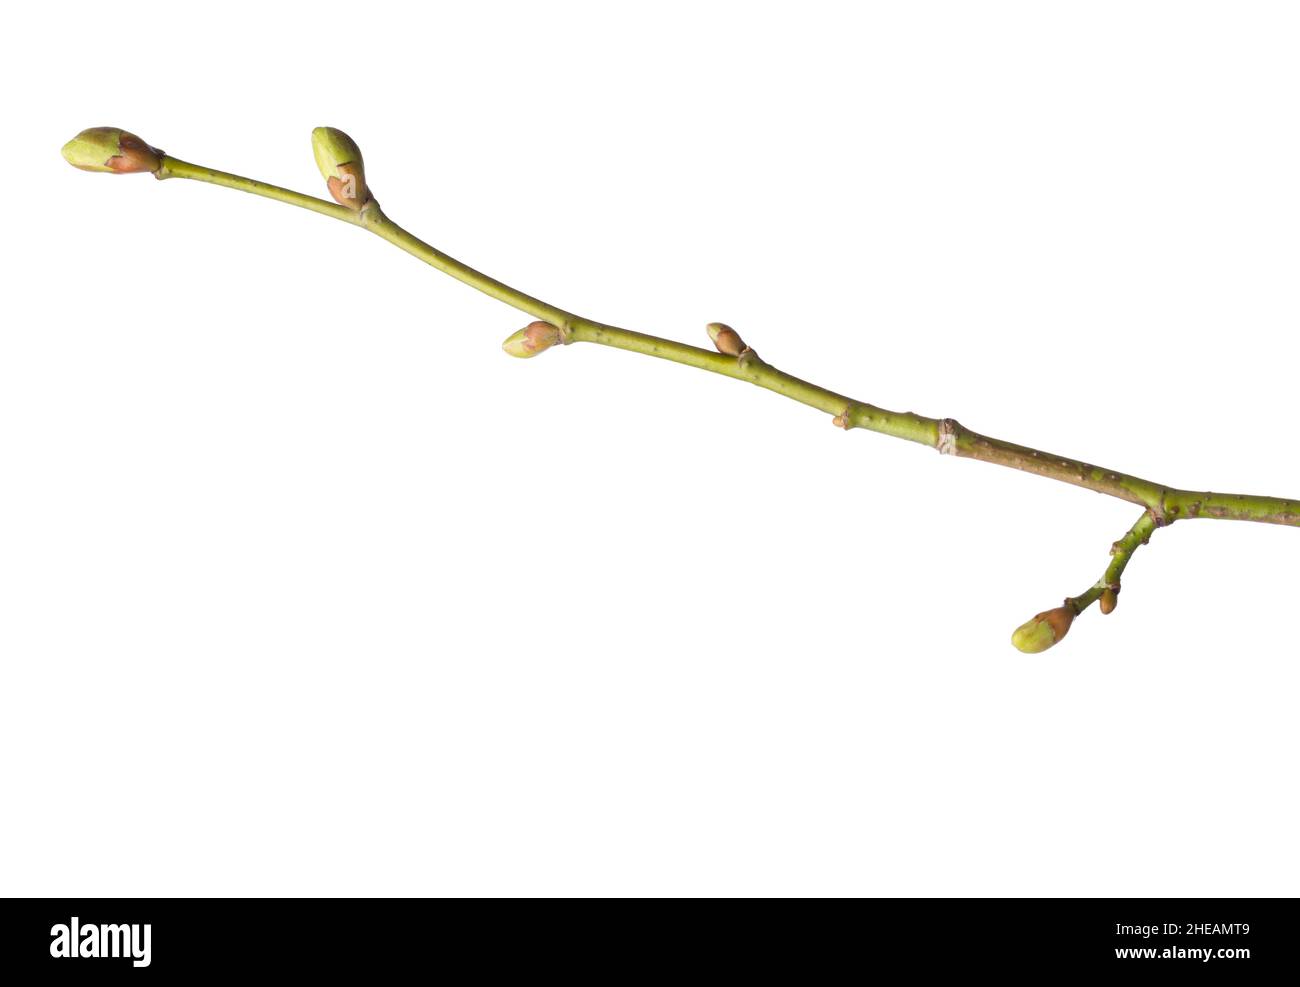 Close-up of  Linden branch with swollen buds on isolated white background. Stock Photo